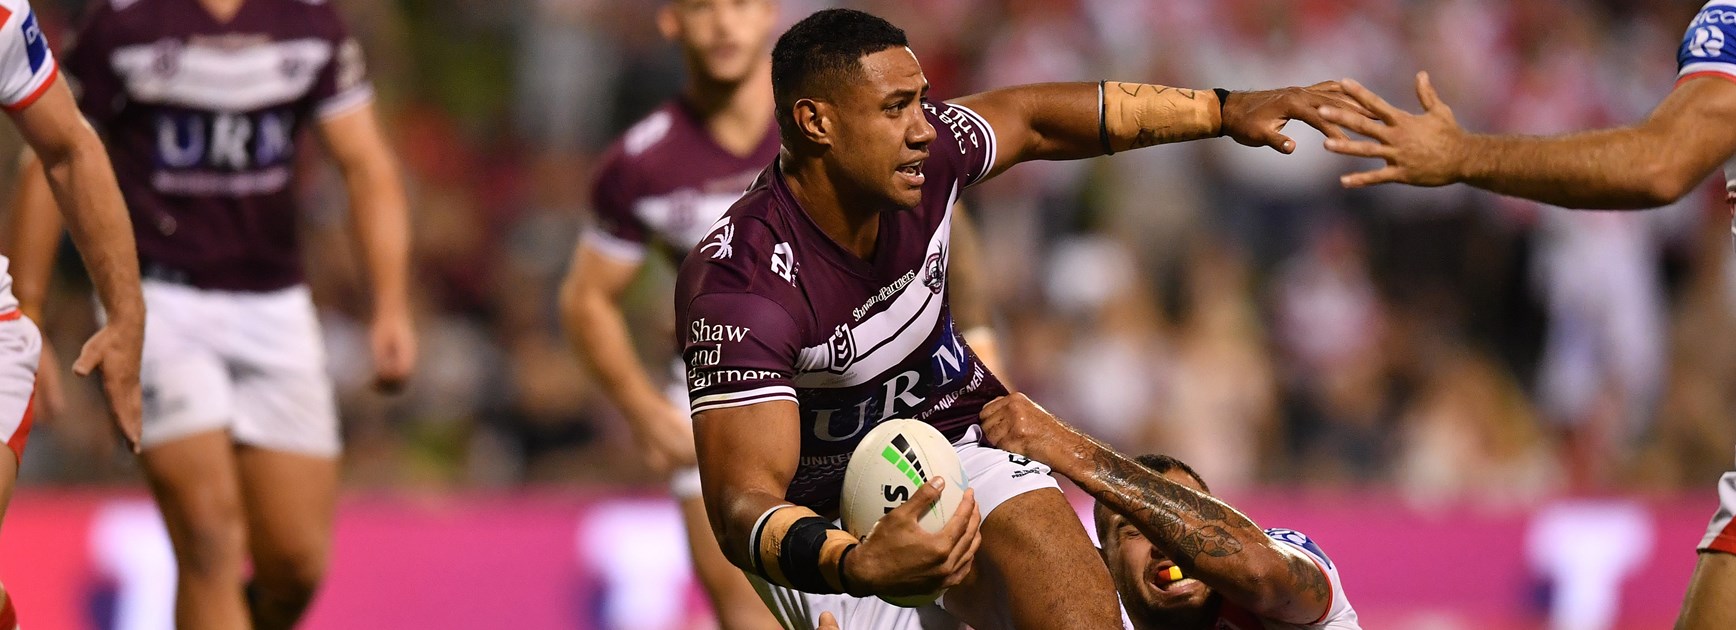 Sea Eagles lose to Dragons in Wollongong